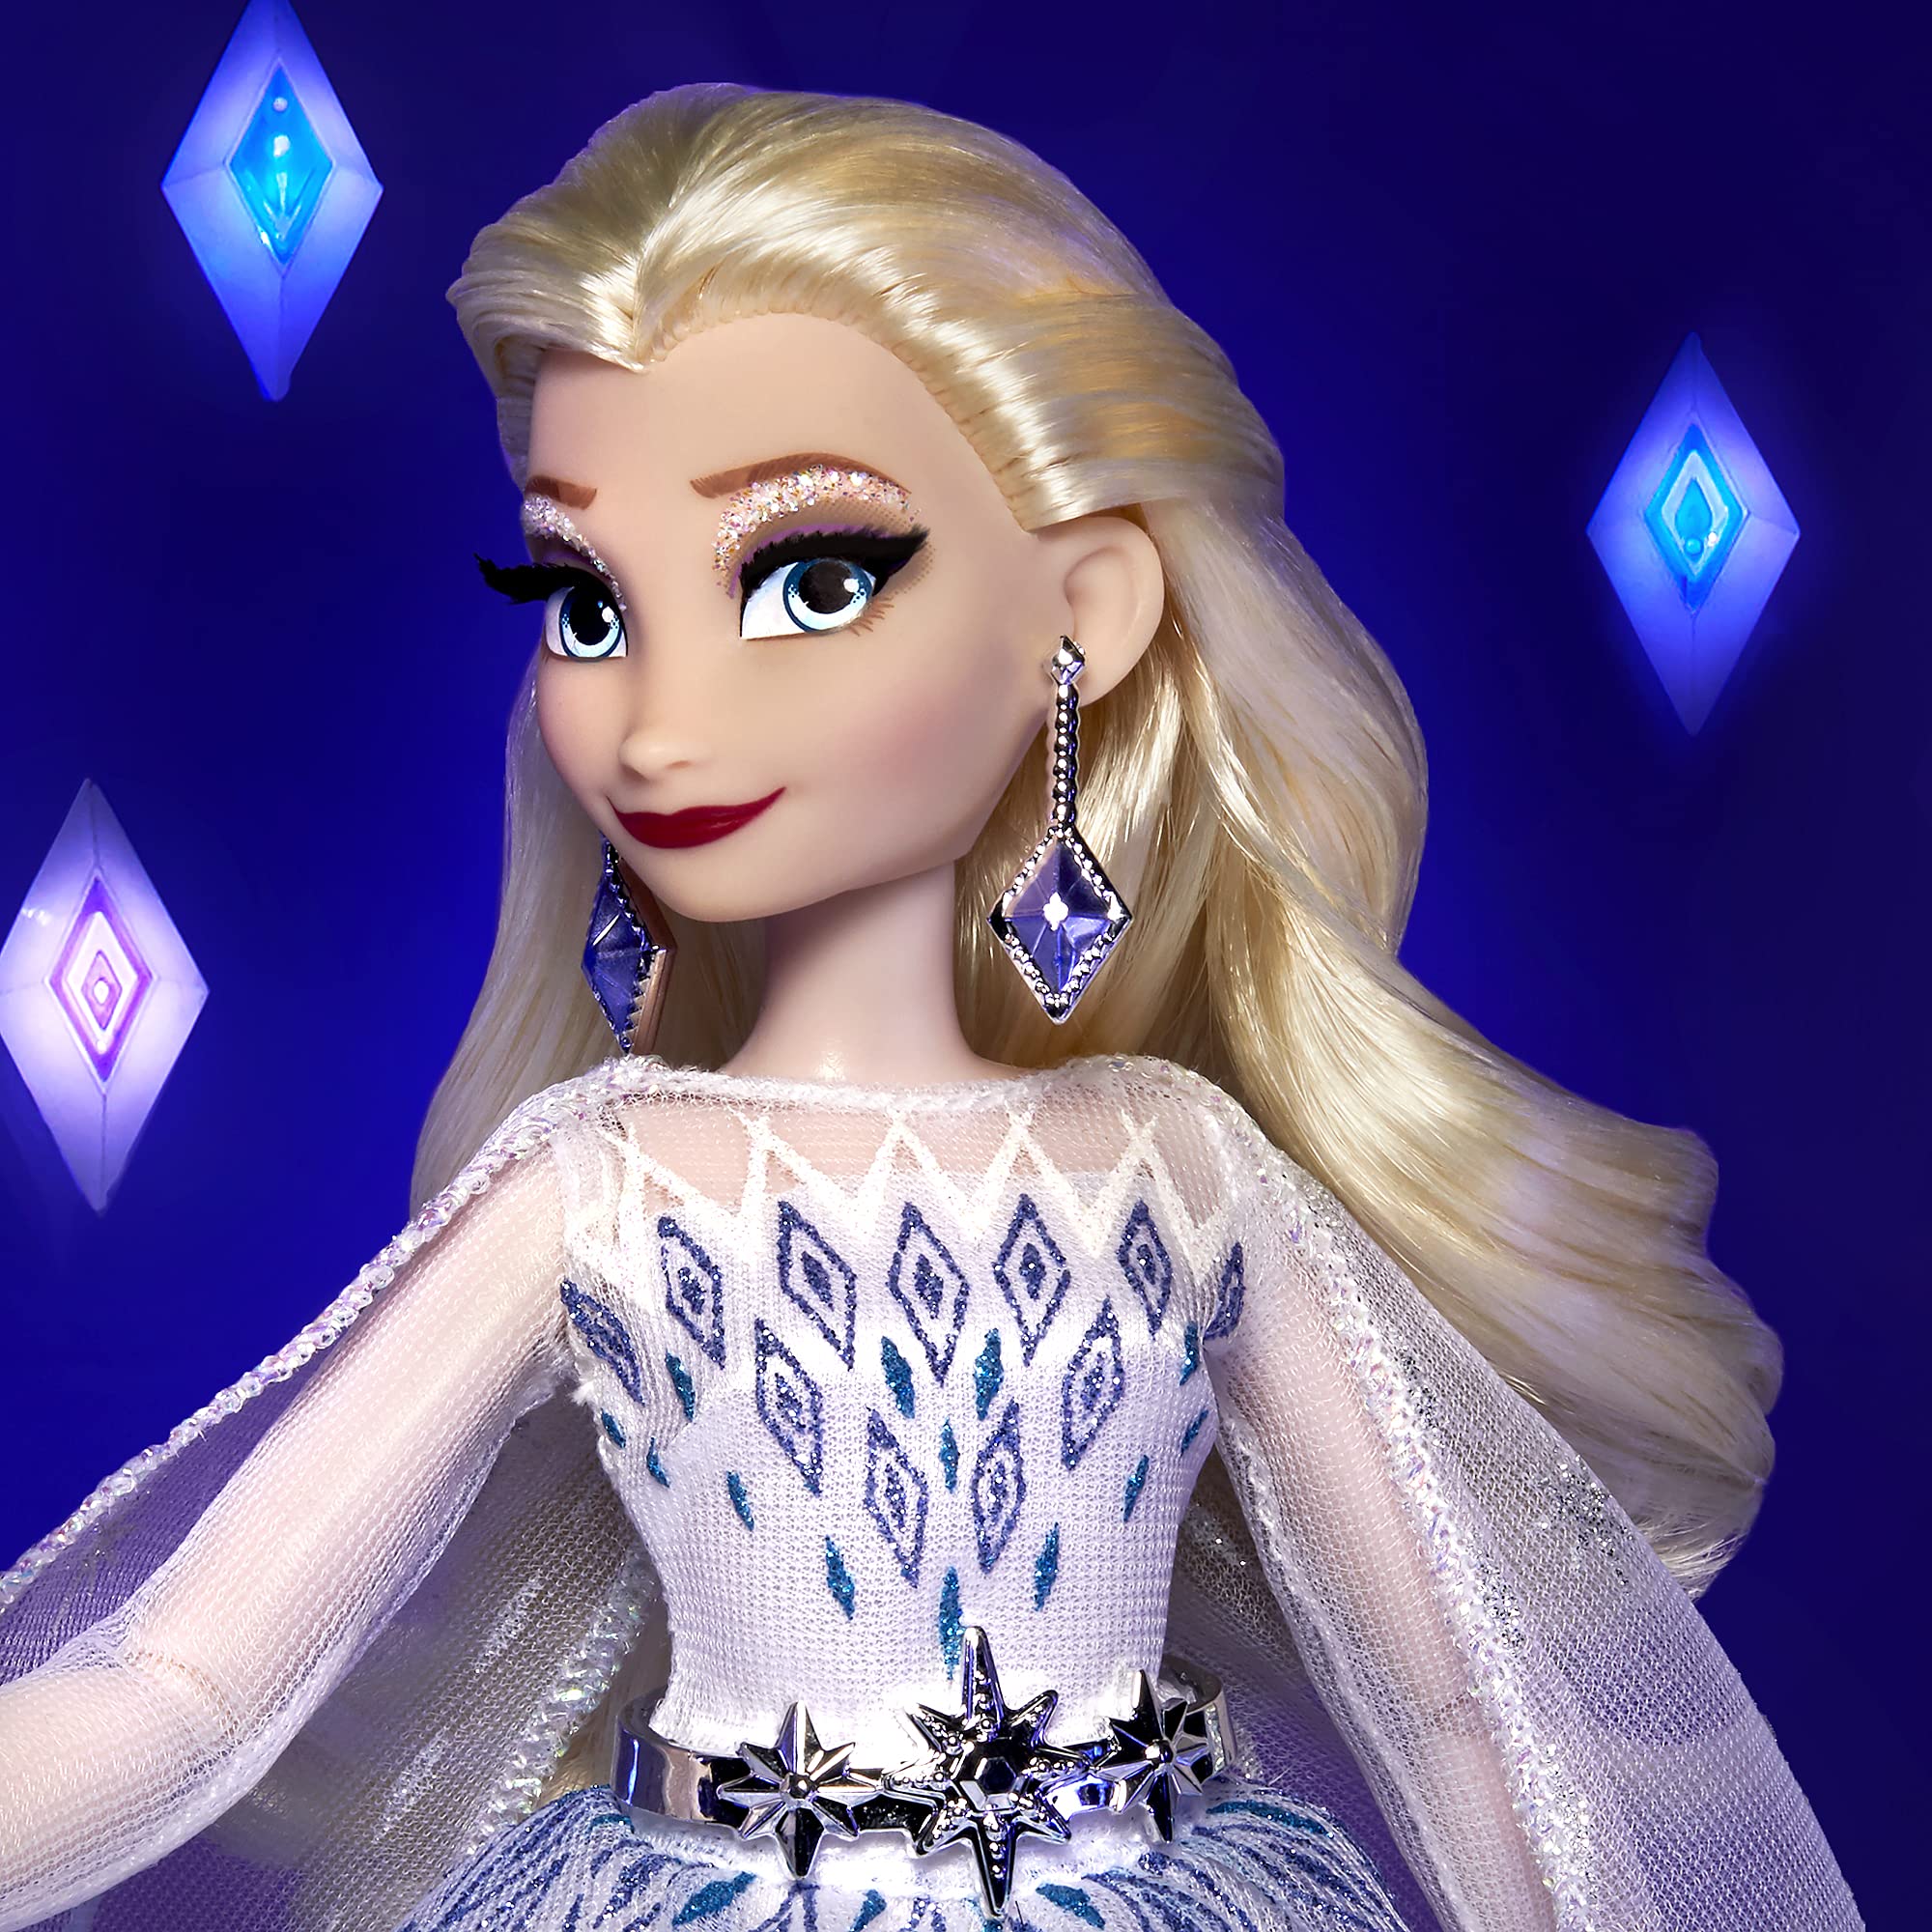 Disney Princess Style Series Holiday Elsa Doll, Fashion Doll Accessories, Collector Toy for Kids 6 and Up, White